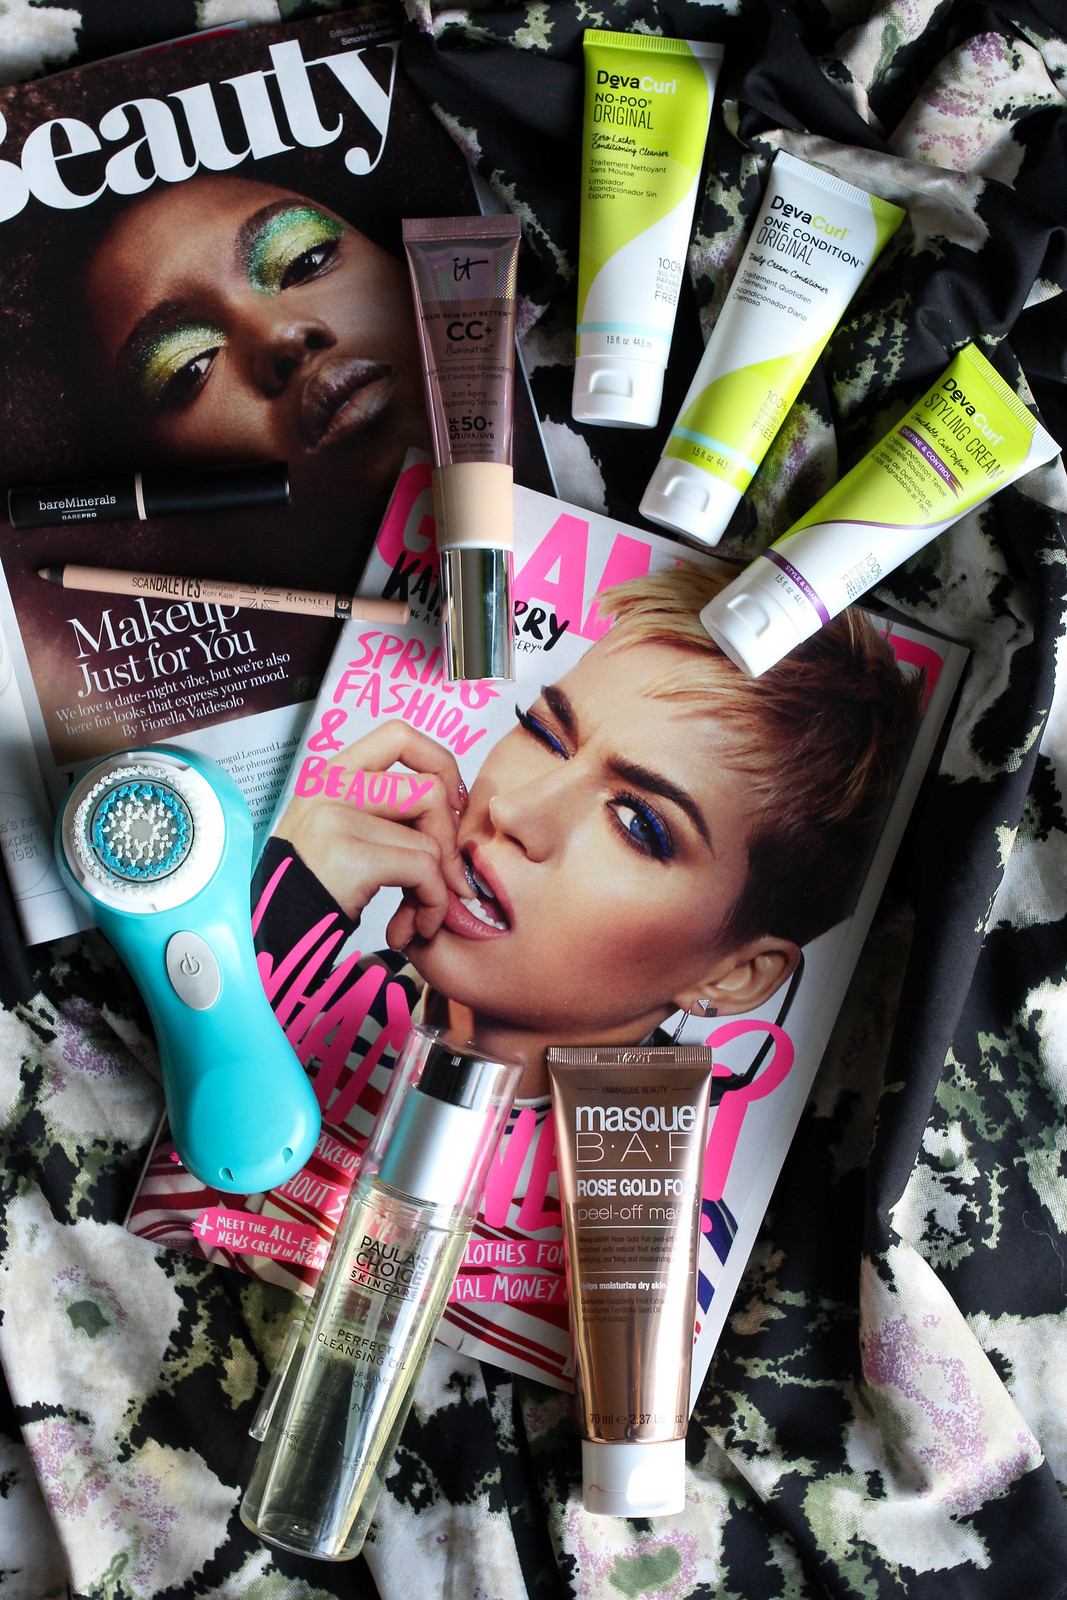 The 7 New Beauty Products I Tried This Month